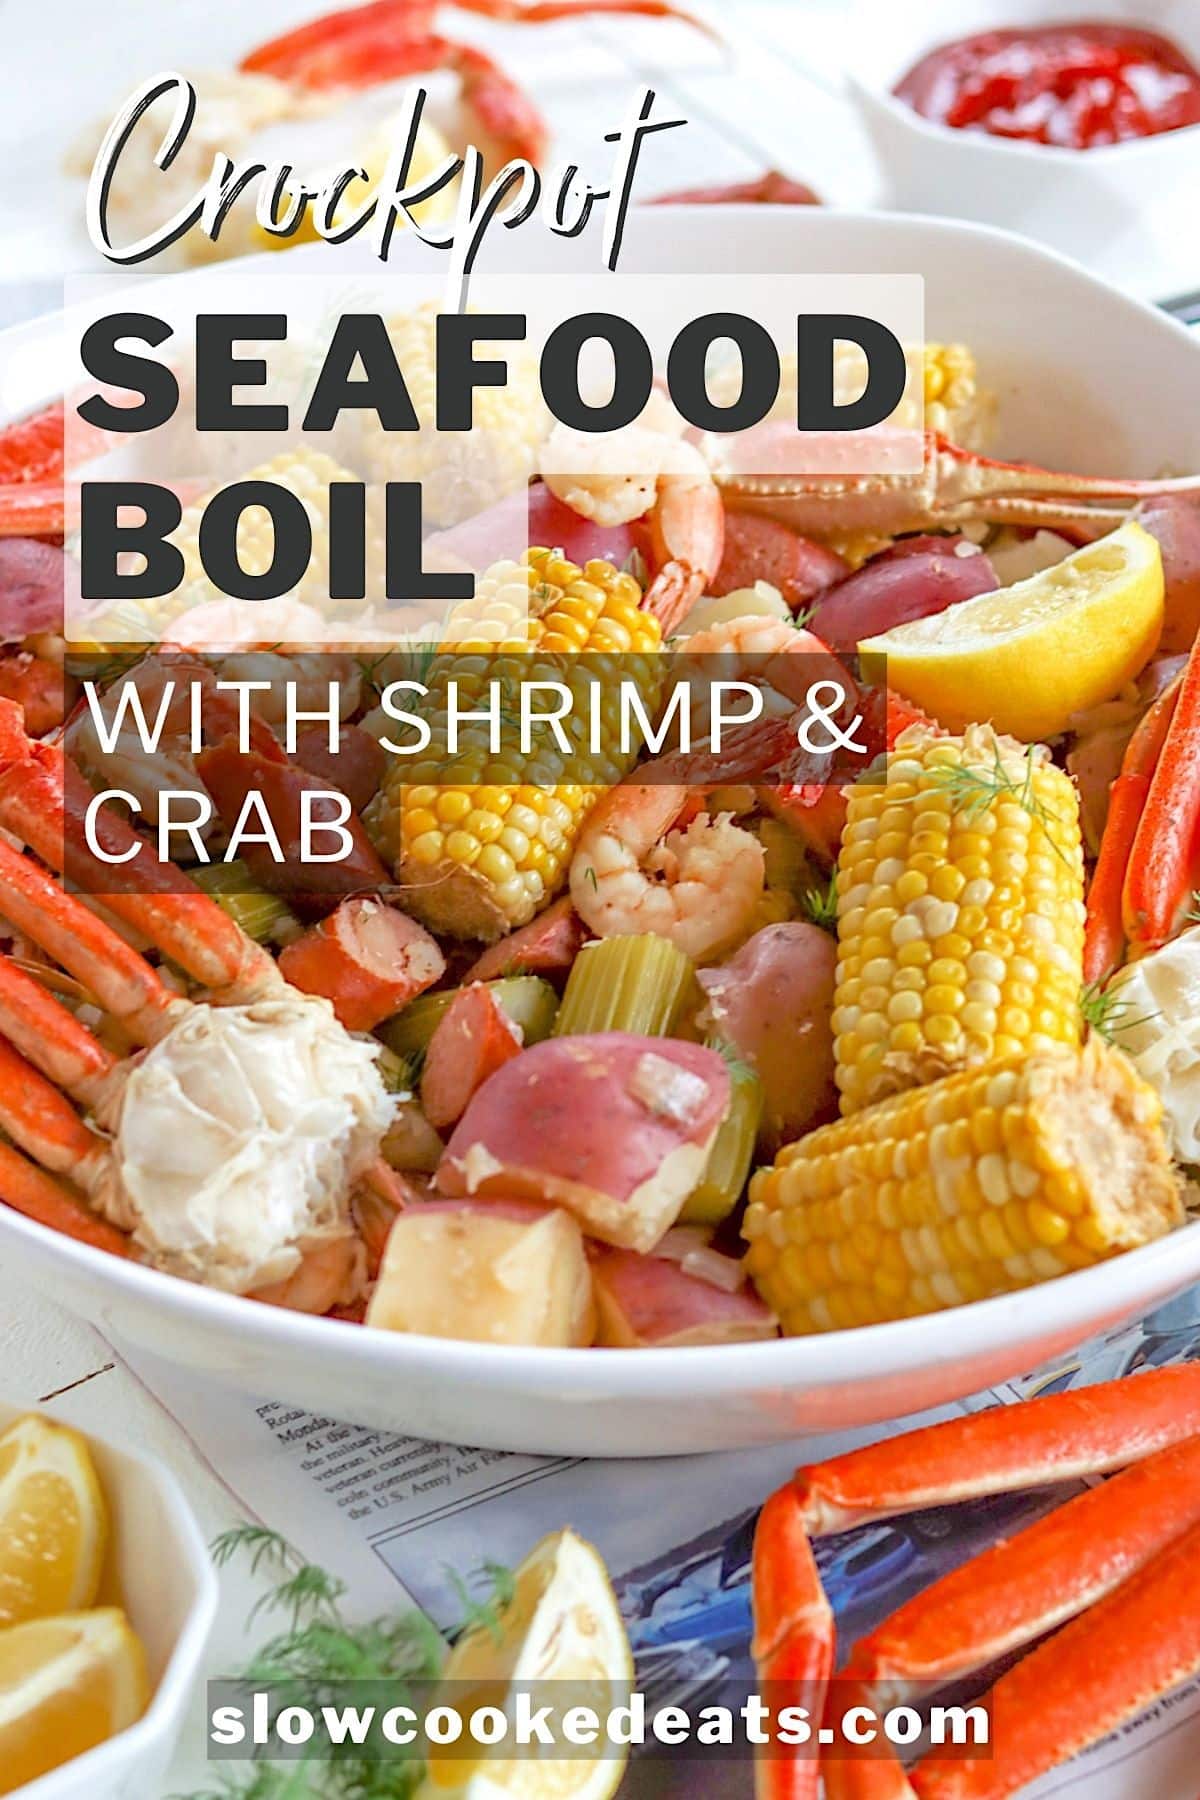 Pinterest pin with crock pot seafood boil served in a large white platter.